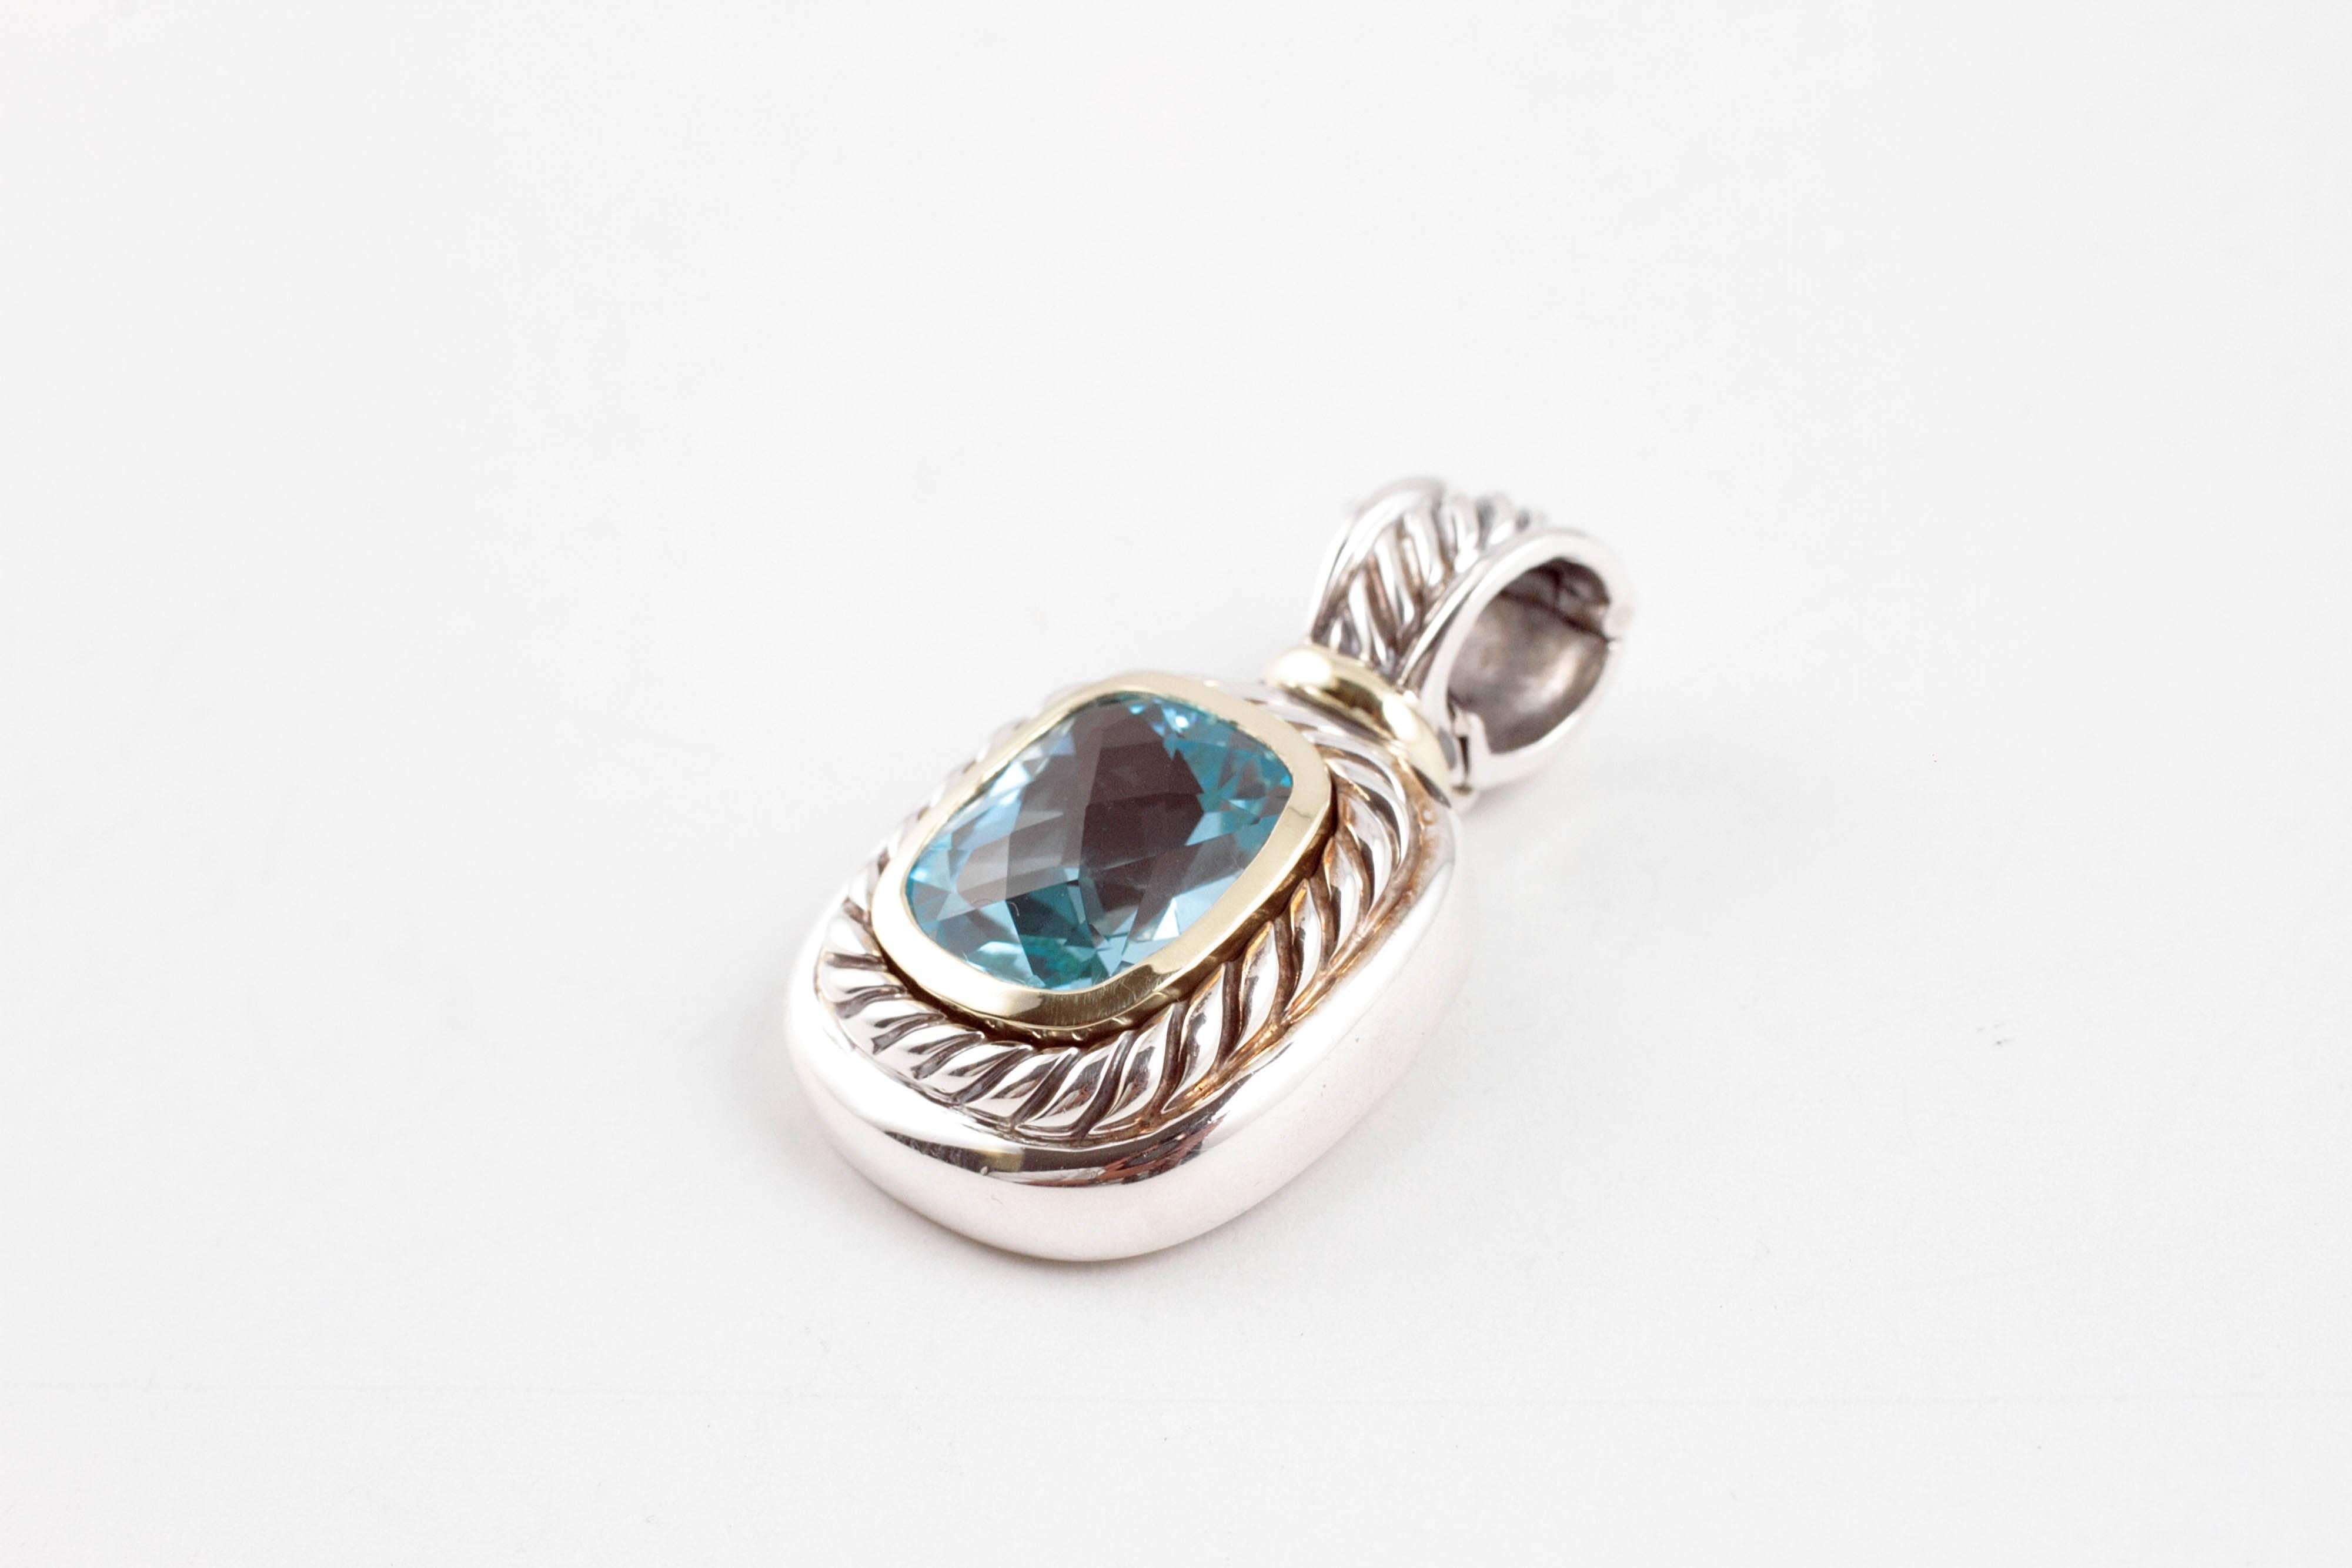 Timeless classic in sterling silver and yellow gold from the Albion line!  This hinged enhancer measures 1.18 inches in length x .63 inches in width and is centered with a striking blue topaz.  